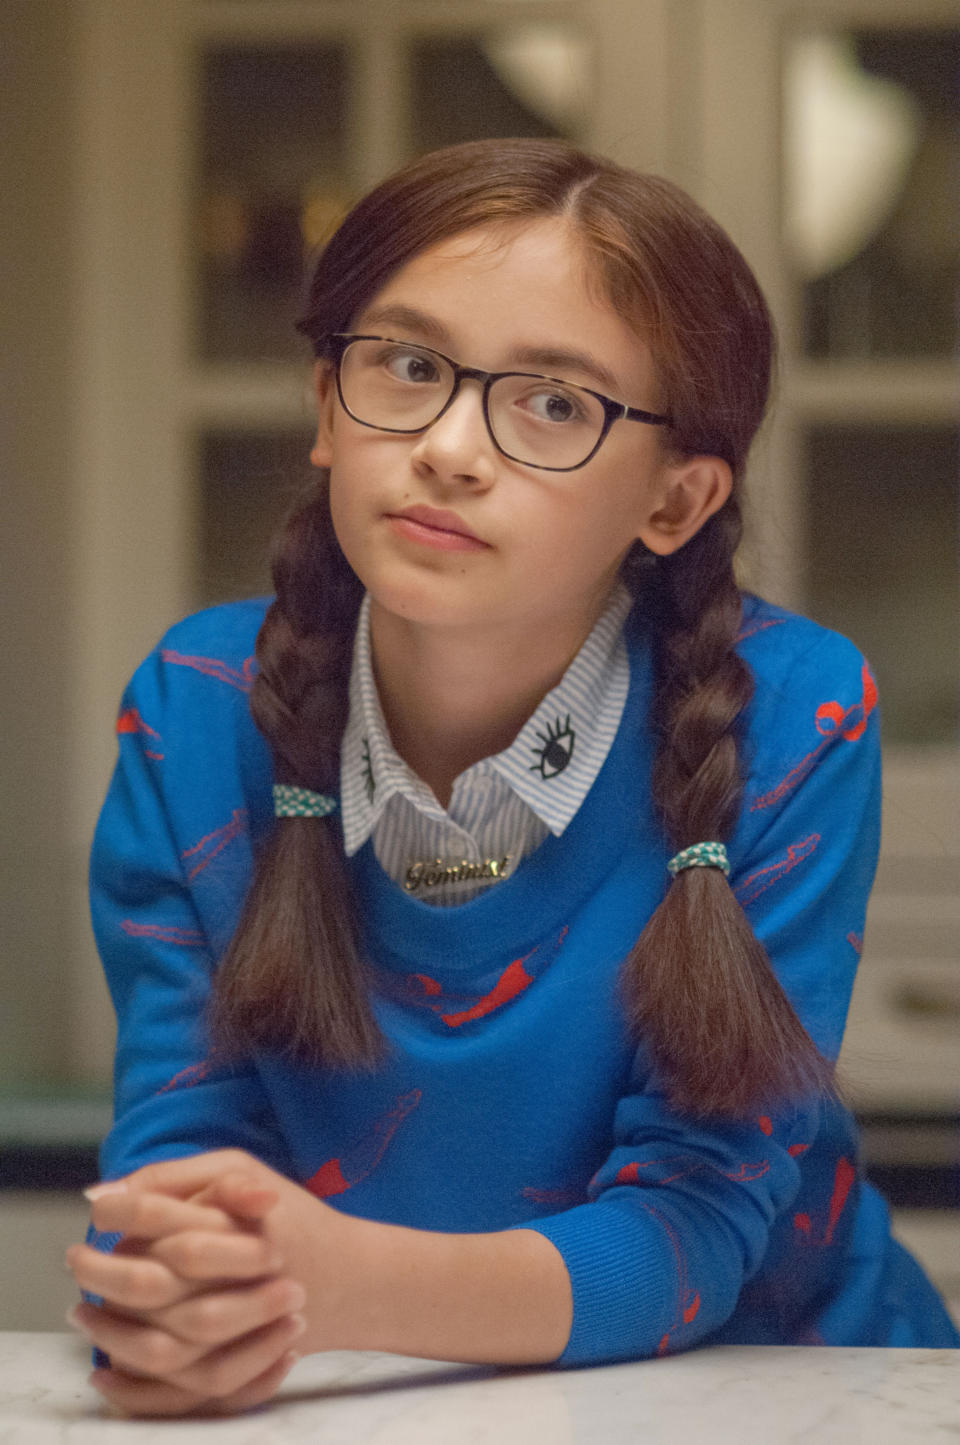 Anna Cathcart in To All the Boys I've Loved Before